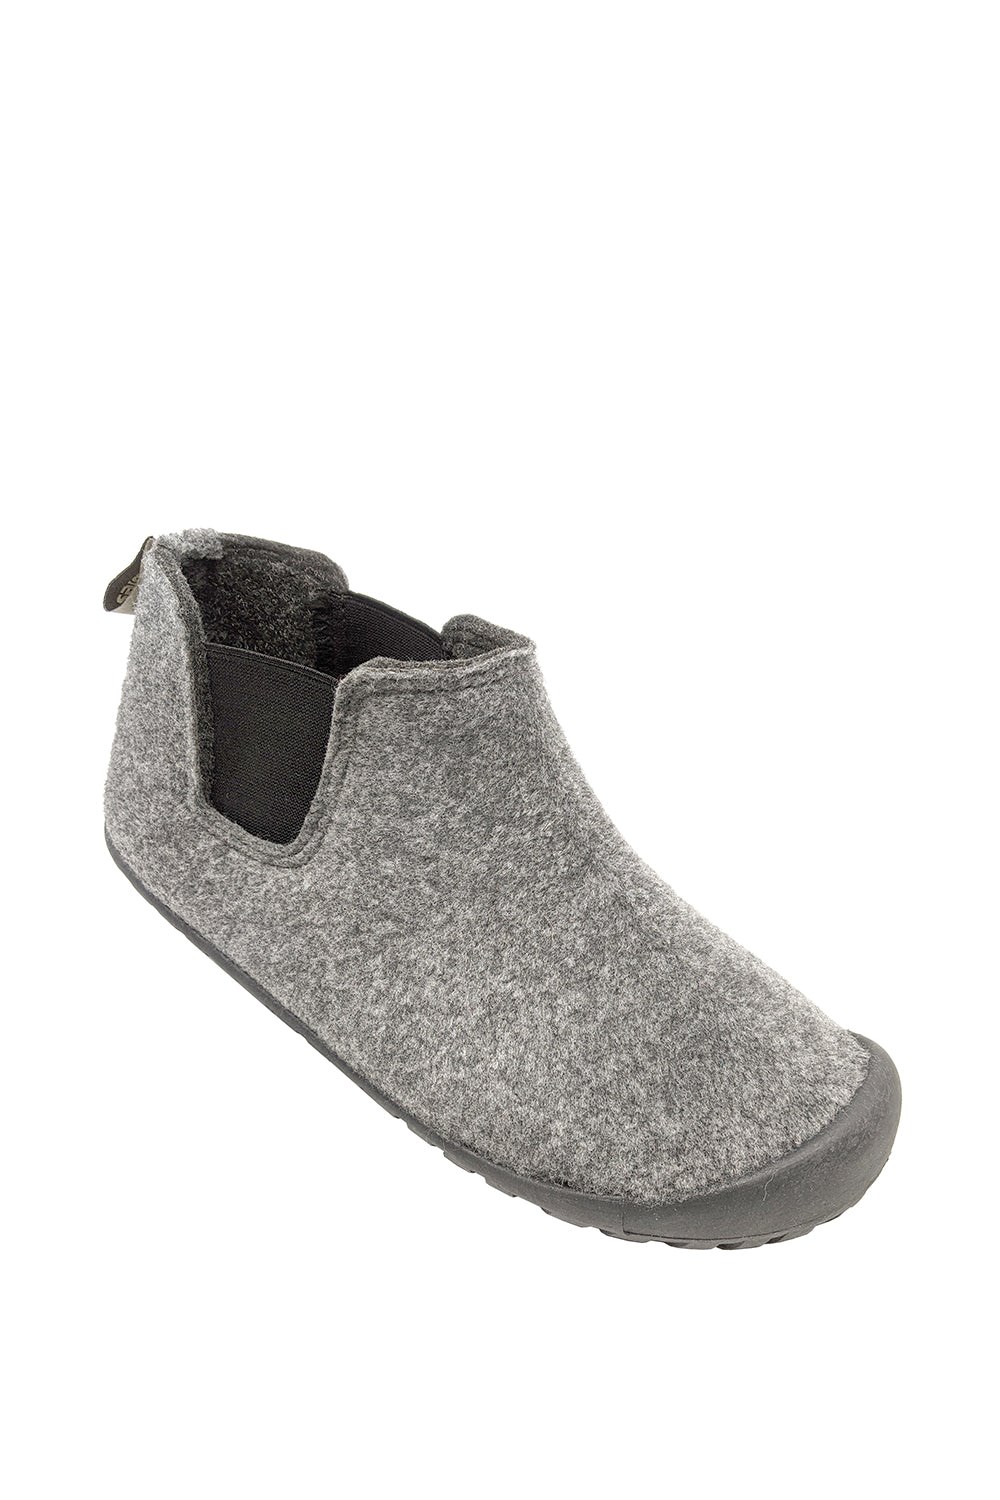 Brumby Womens Slipper Boots -